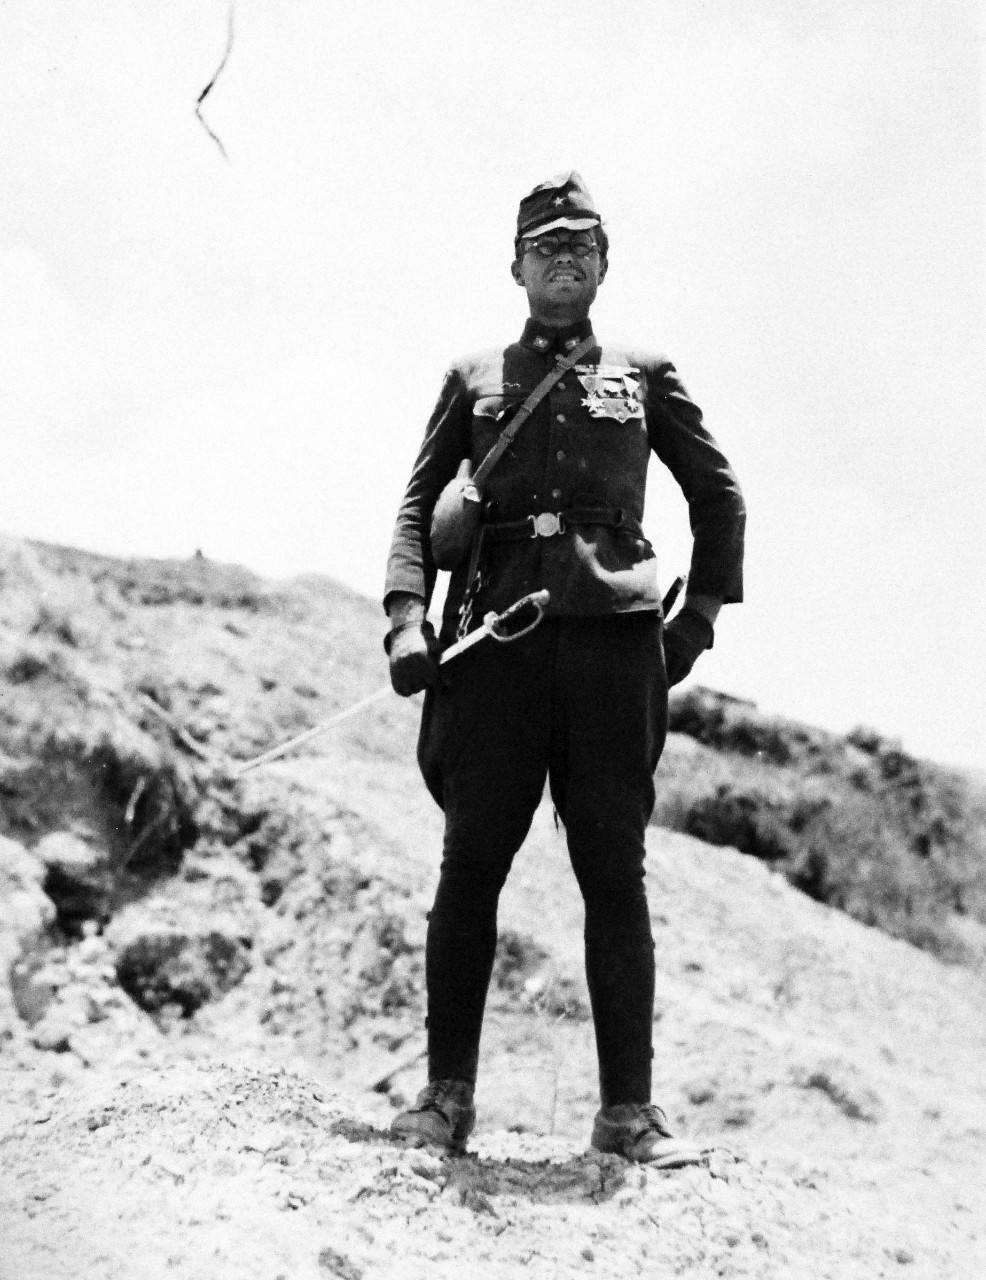 127-GW-535-128868:  Okinawa Campaign, April-June 1945.   Corporal John A. Tillotson, USMC, poses in a Japanese uniform found on Okinawa.   Photographed by McElroy, 19 June 1945.  Official U.S. Navy Photograph, now in the collections of the National Archives.   (2014/6/25). 